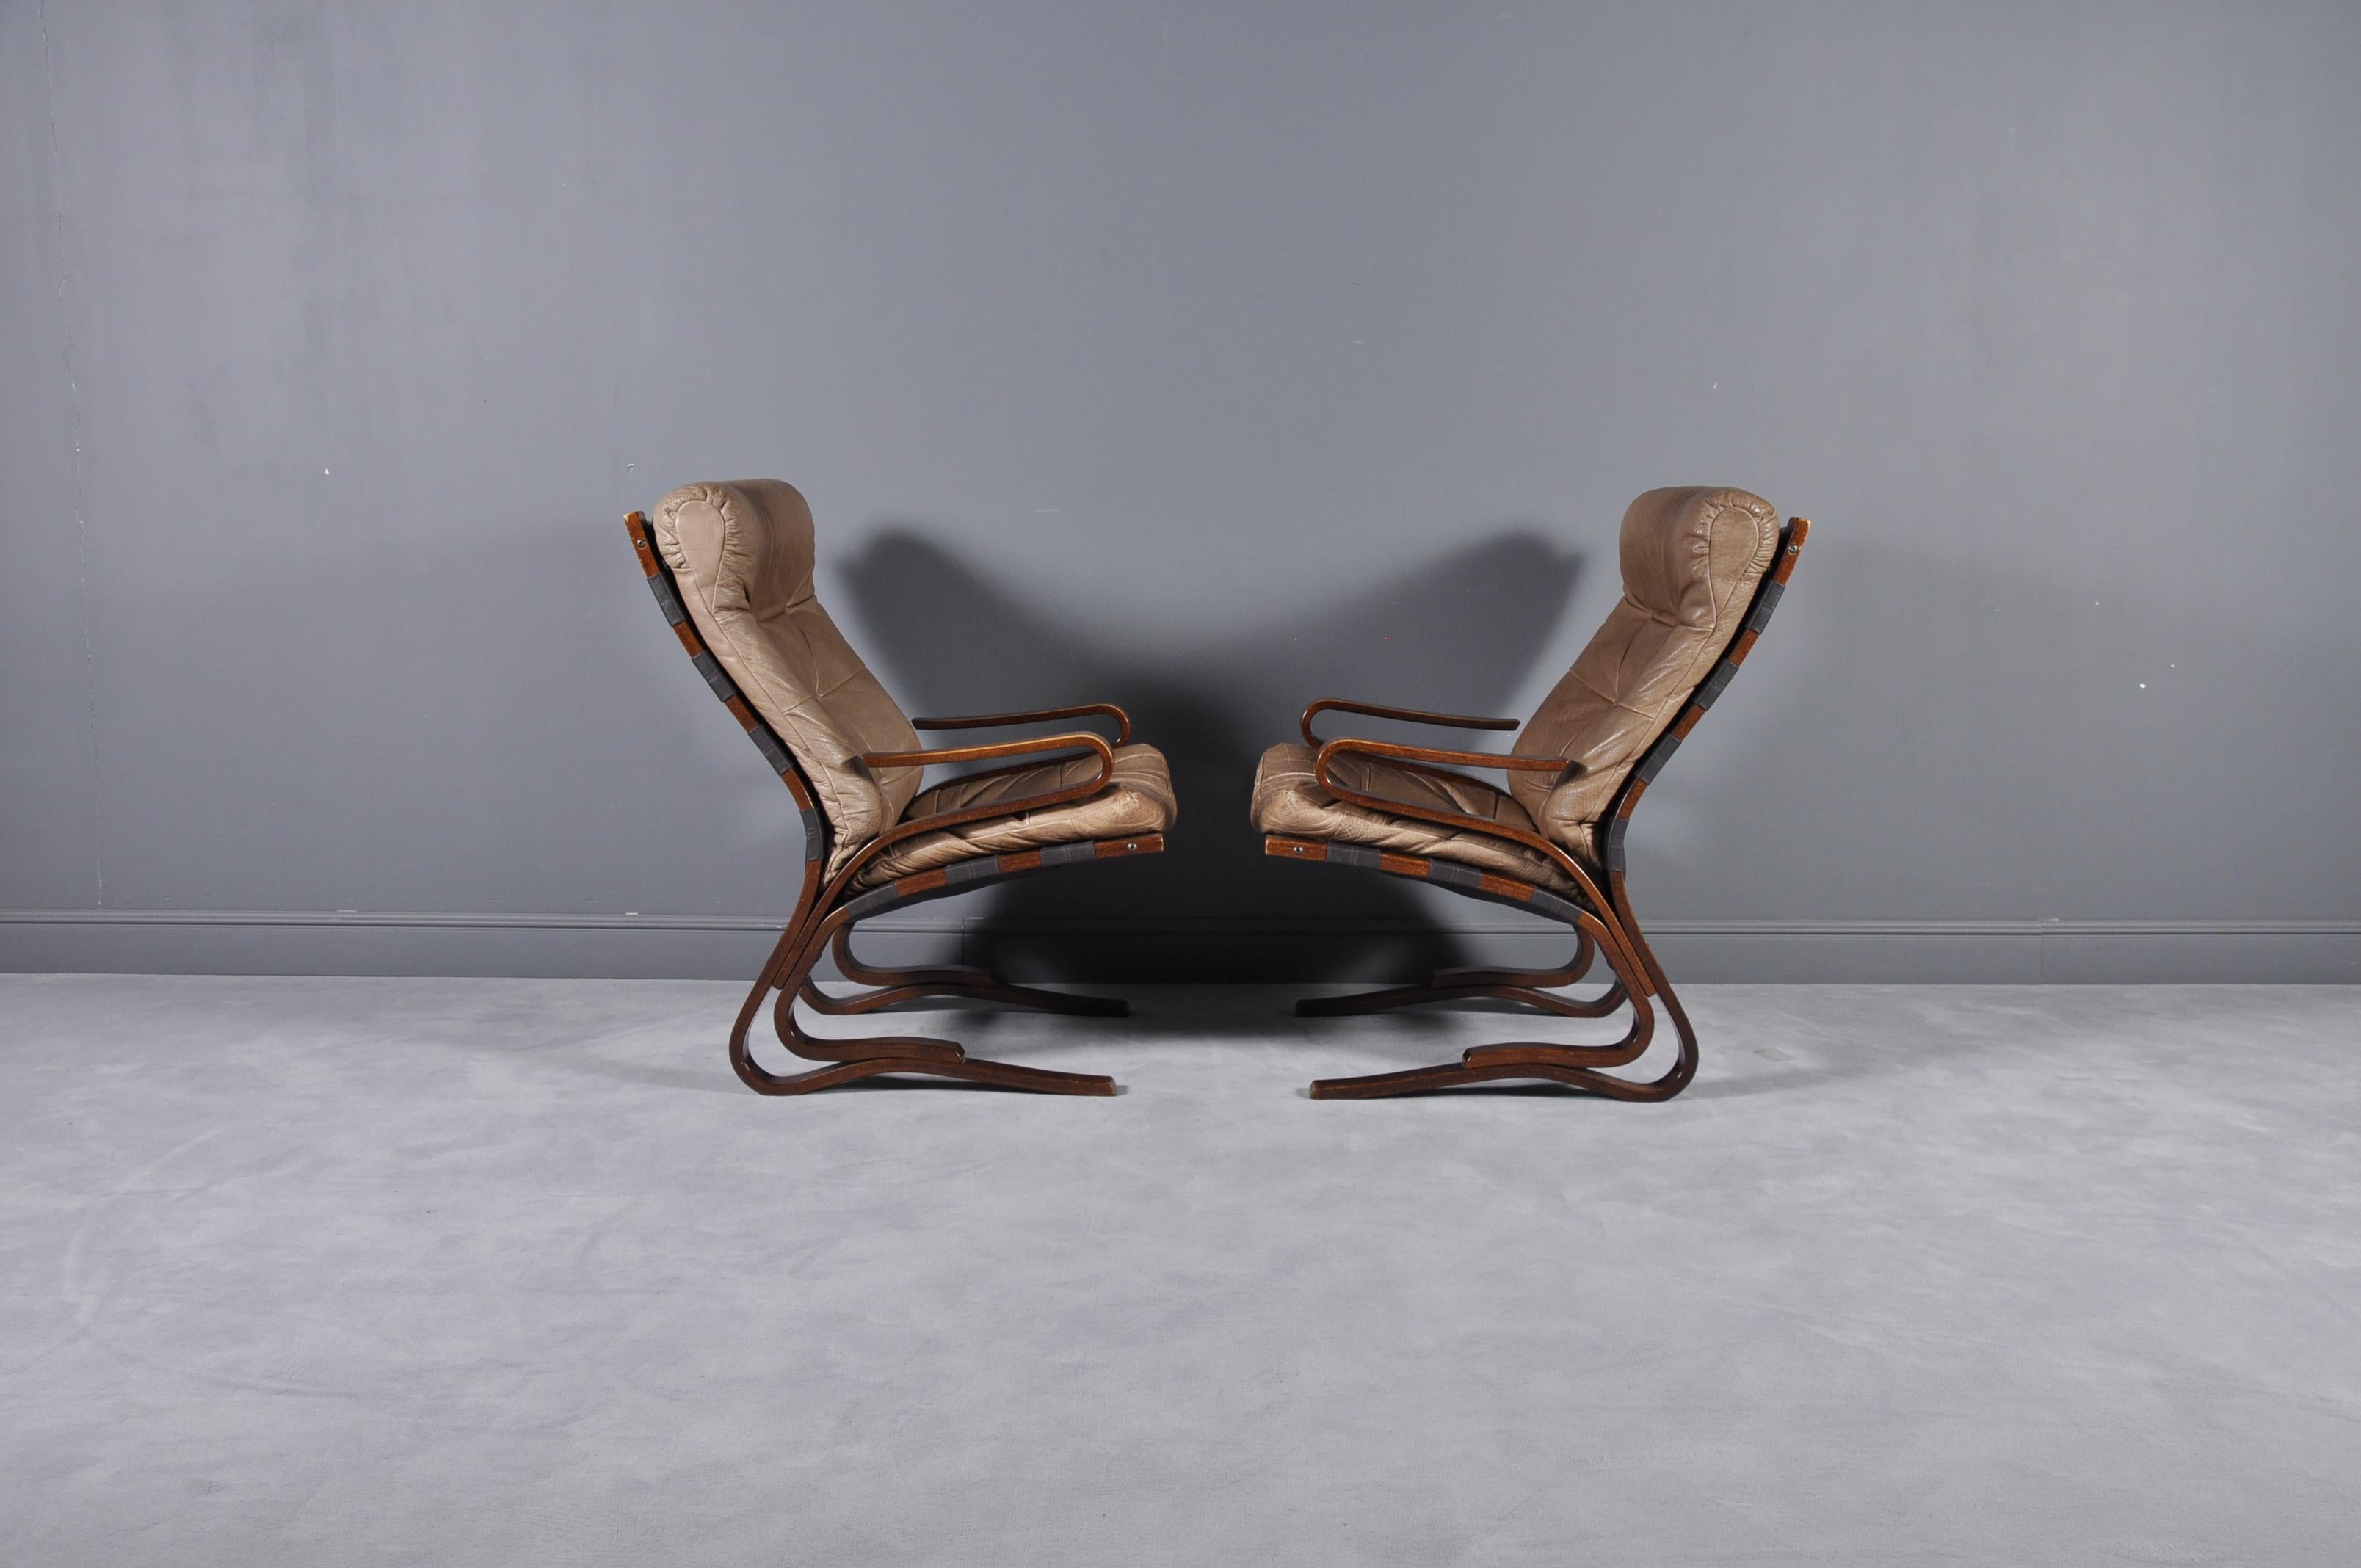 A pair of cognac leather armchairs on a rosewood frame. These were designed by Oddvin Rykken in Norway during the 1970s, and manufactured by Rykken & Co.